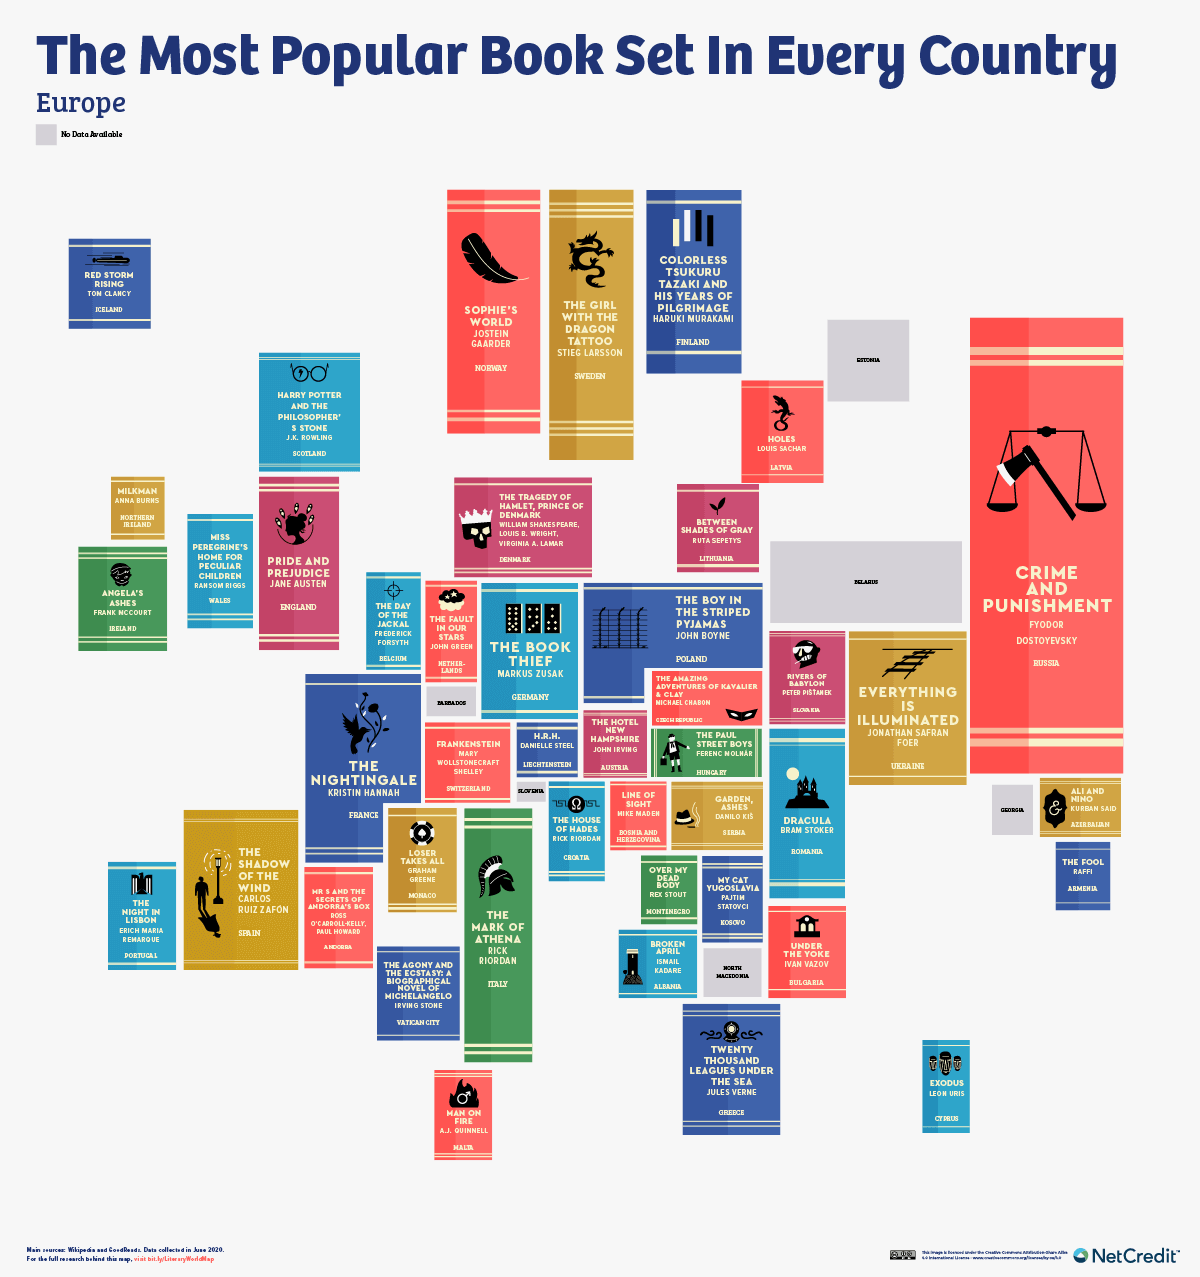 Most Popular Book Set in Europe